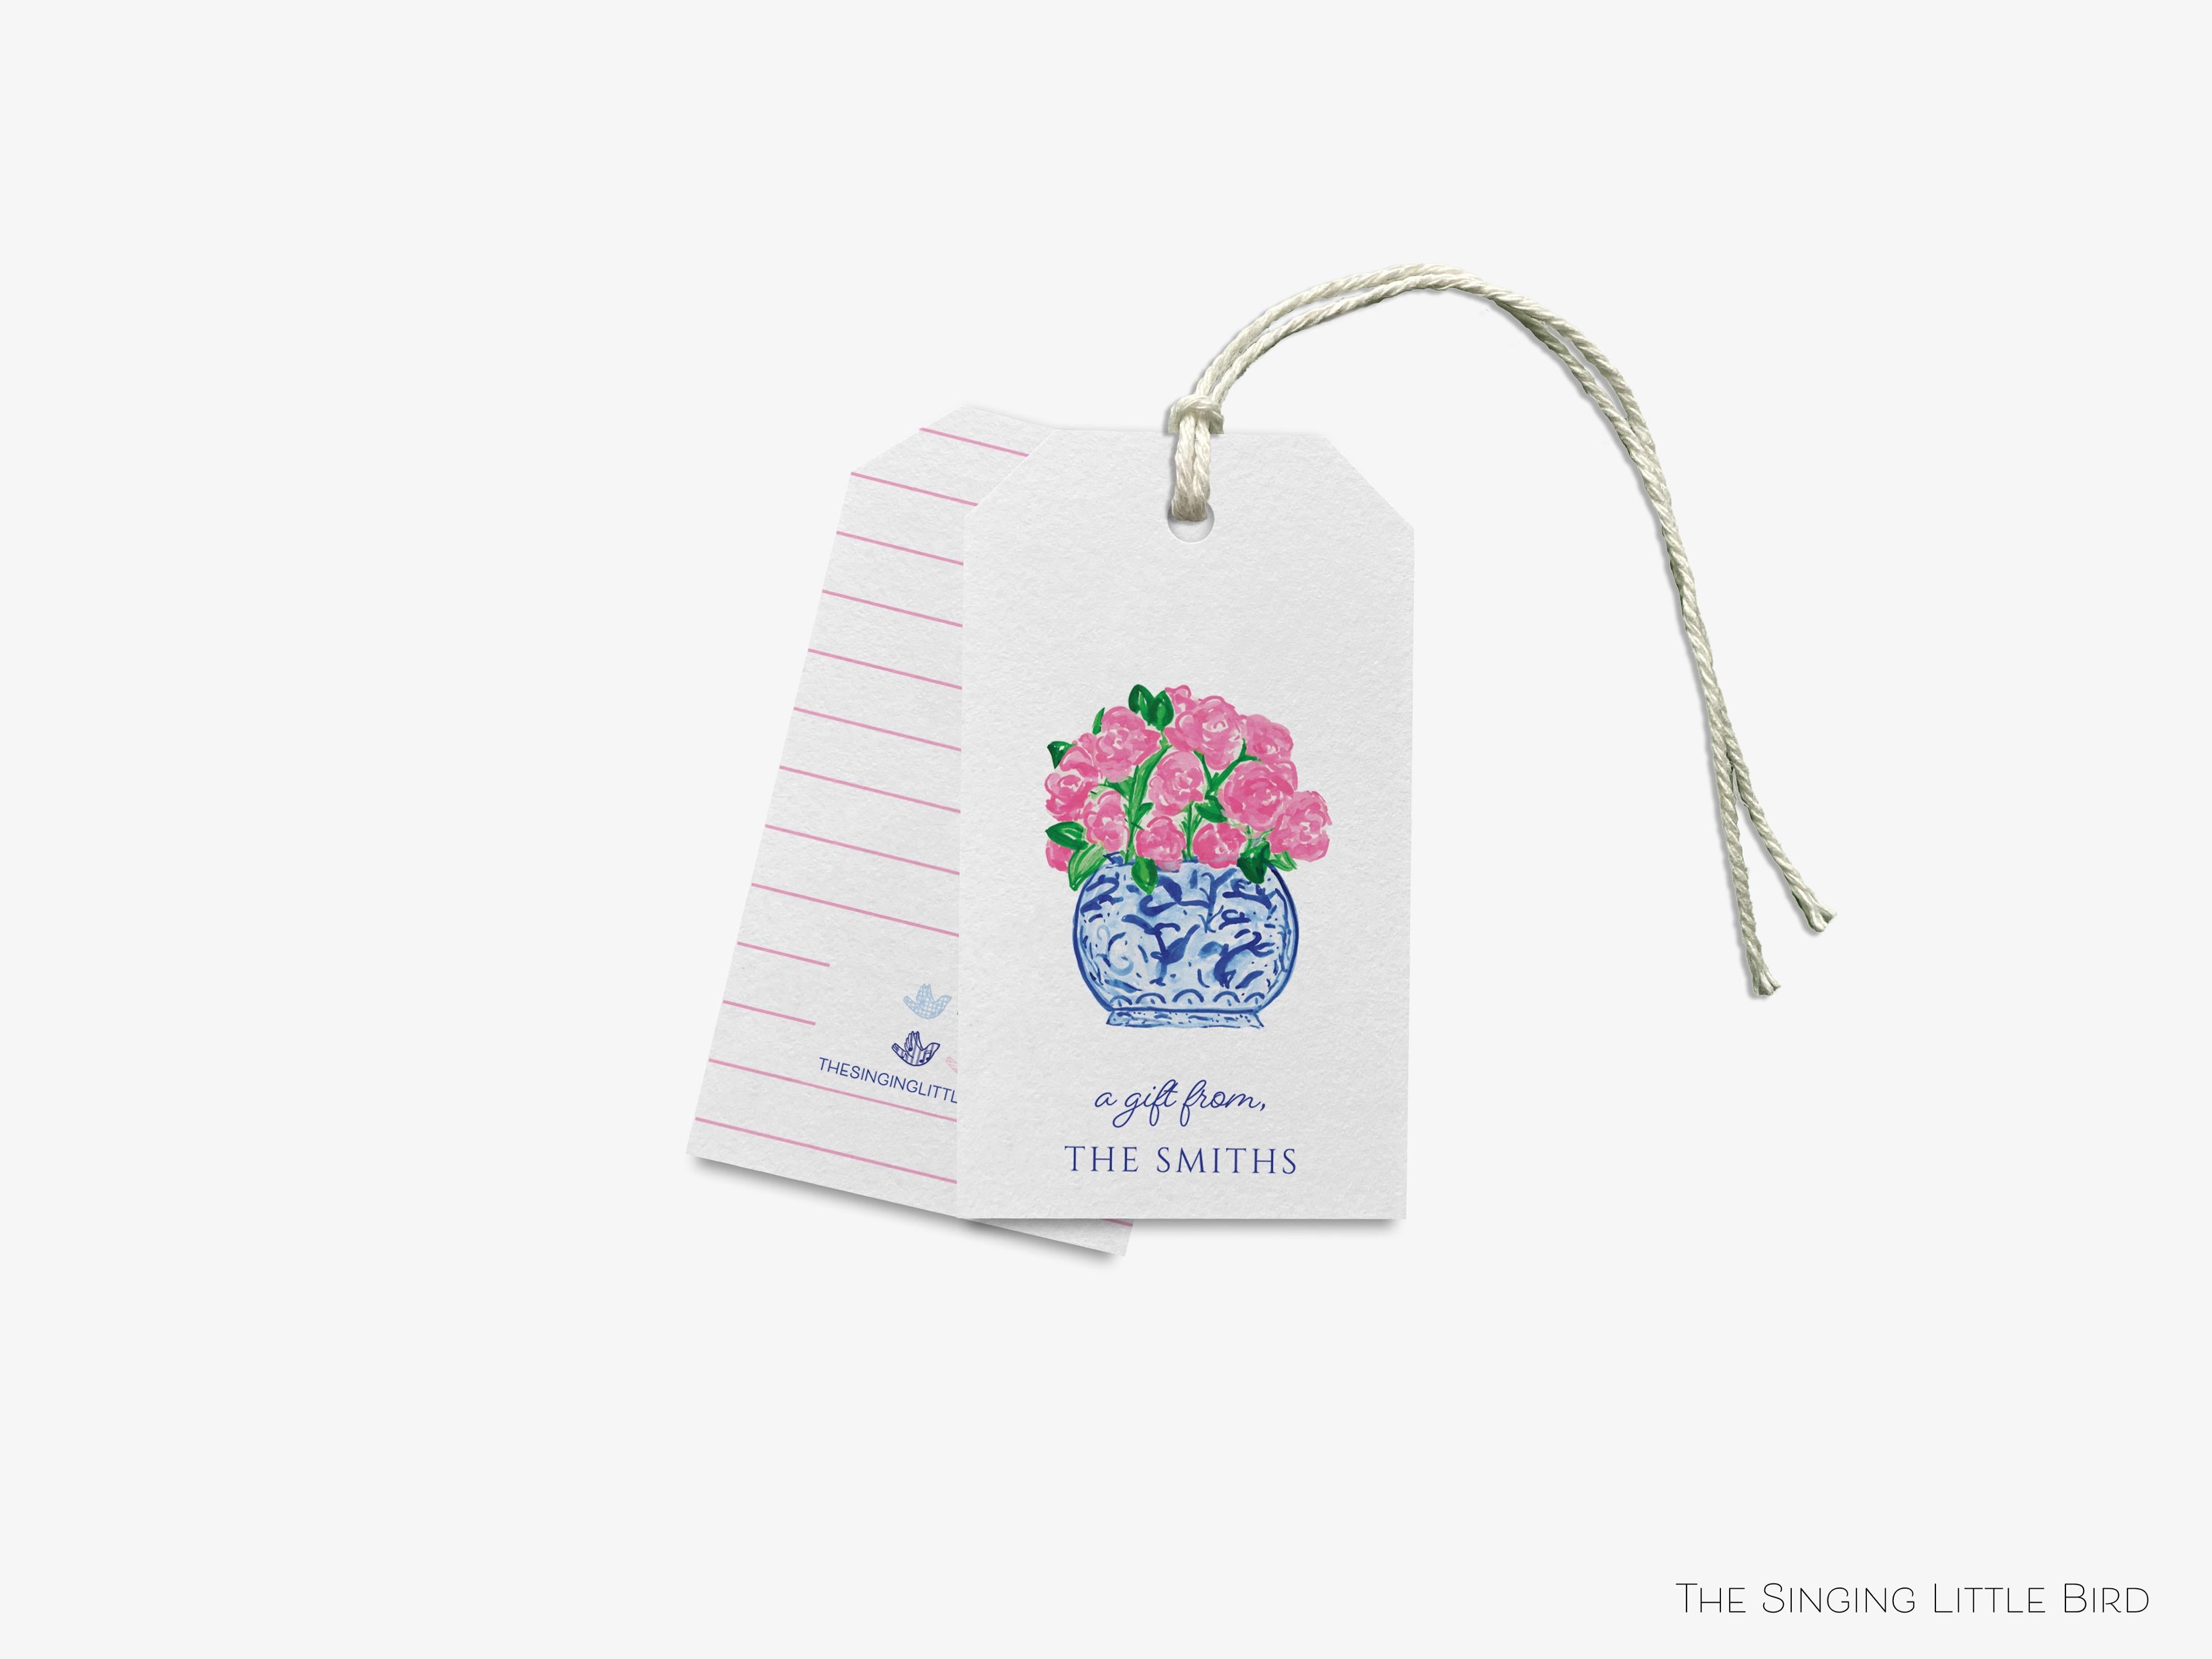 Personalized Peonies in Ginger Jar Gift Tags-These gift tags come in sets, hole-punched with white twine and feature our hand-painted watercolor peonies and ginger jar, printed in the USA on 120lb textured stock. They make great tags for gifting or gifts for the chinoiserie lover in your life.-The Singing Little Bird